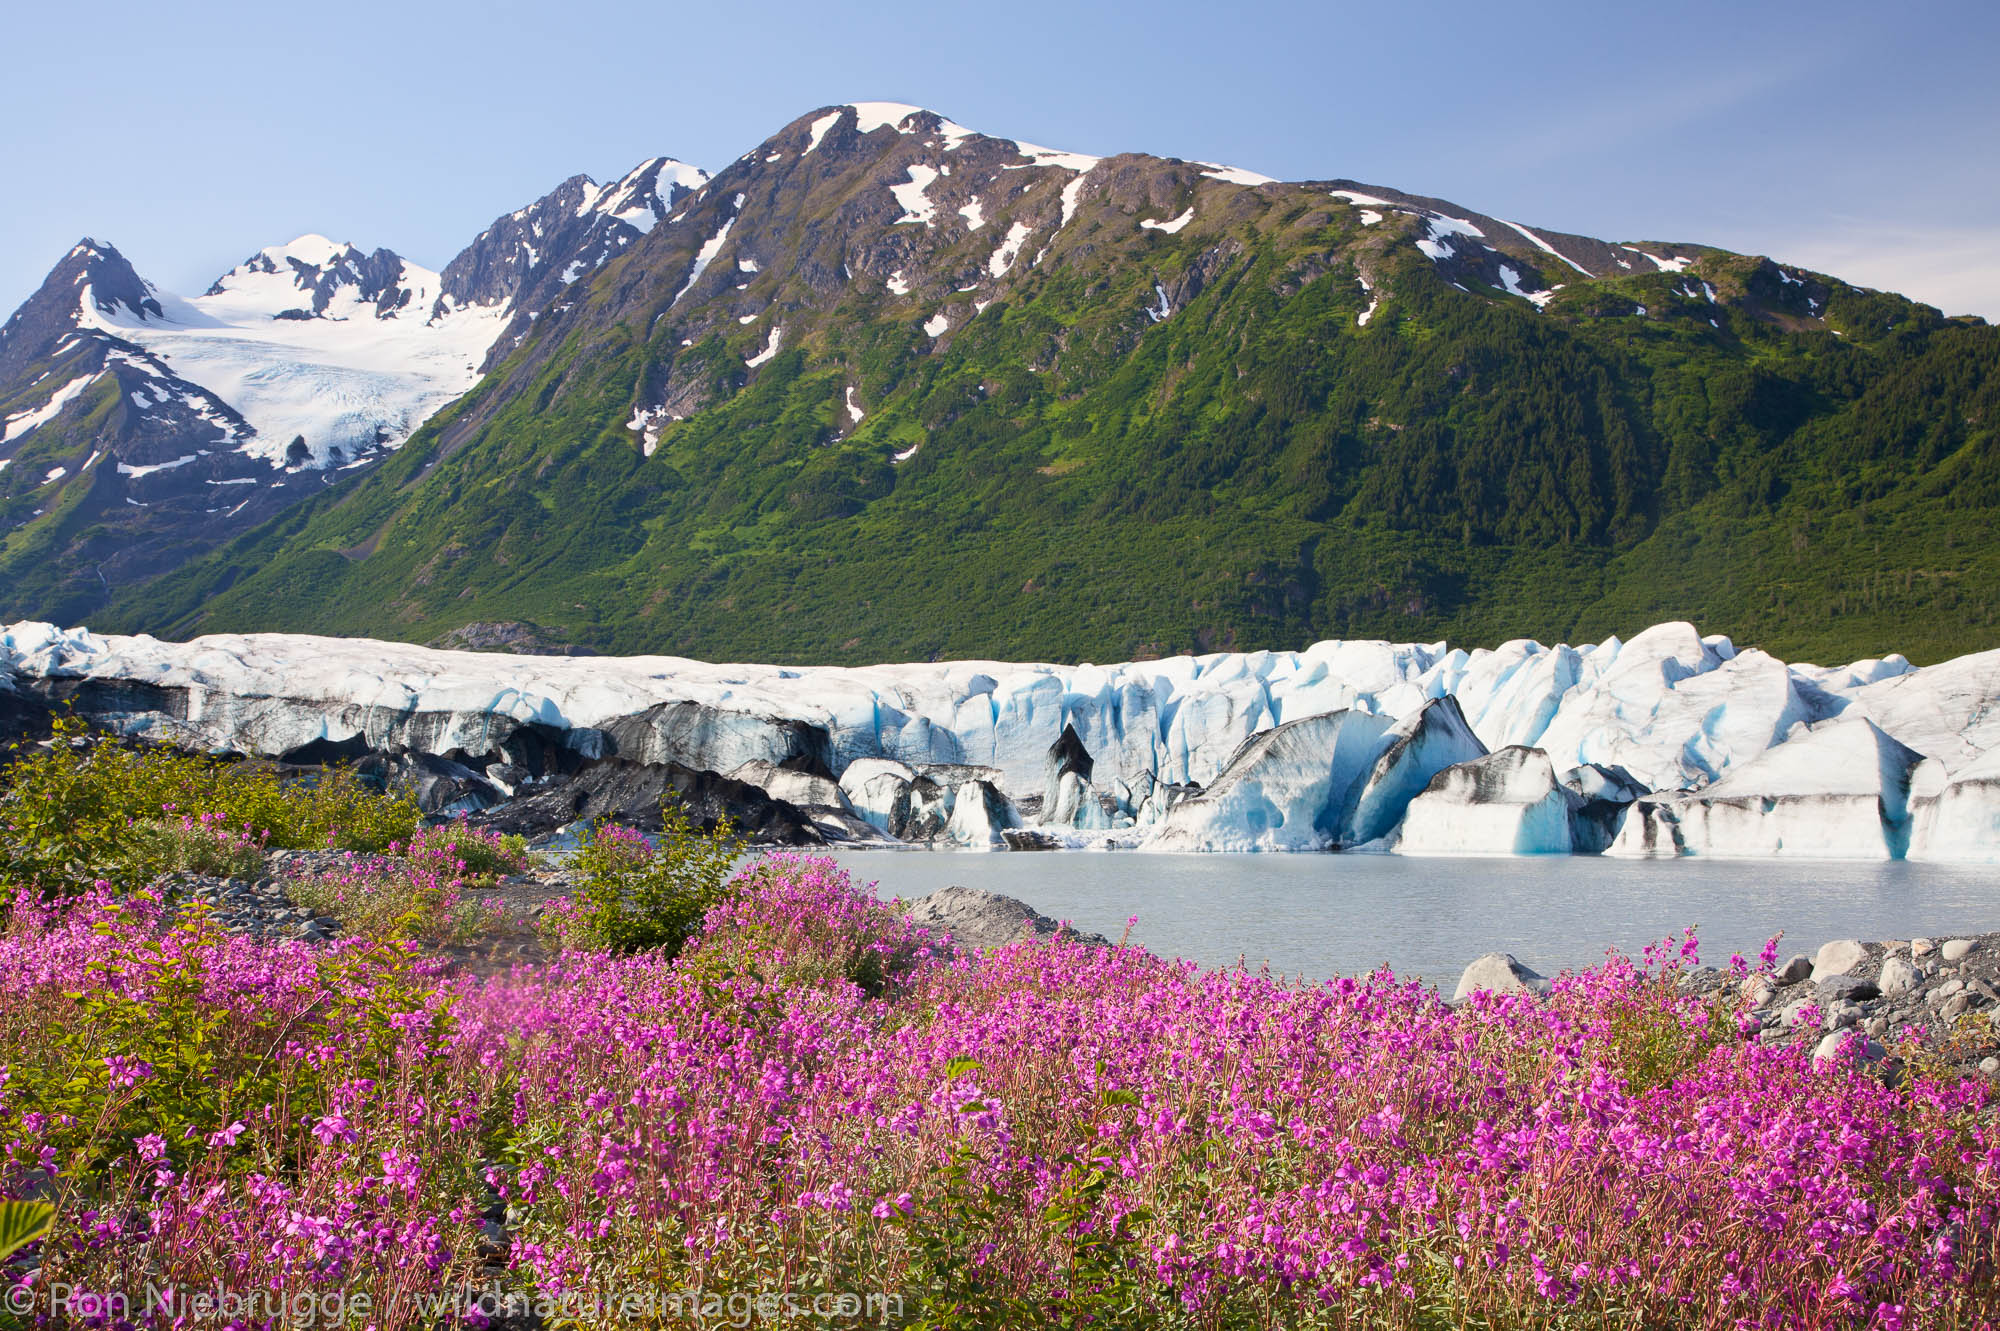 Wildflowers along the lake in front of Spencer Glacier, Chugach National Forest, Alaska.